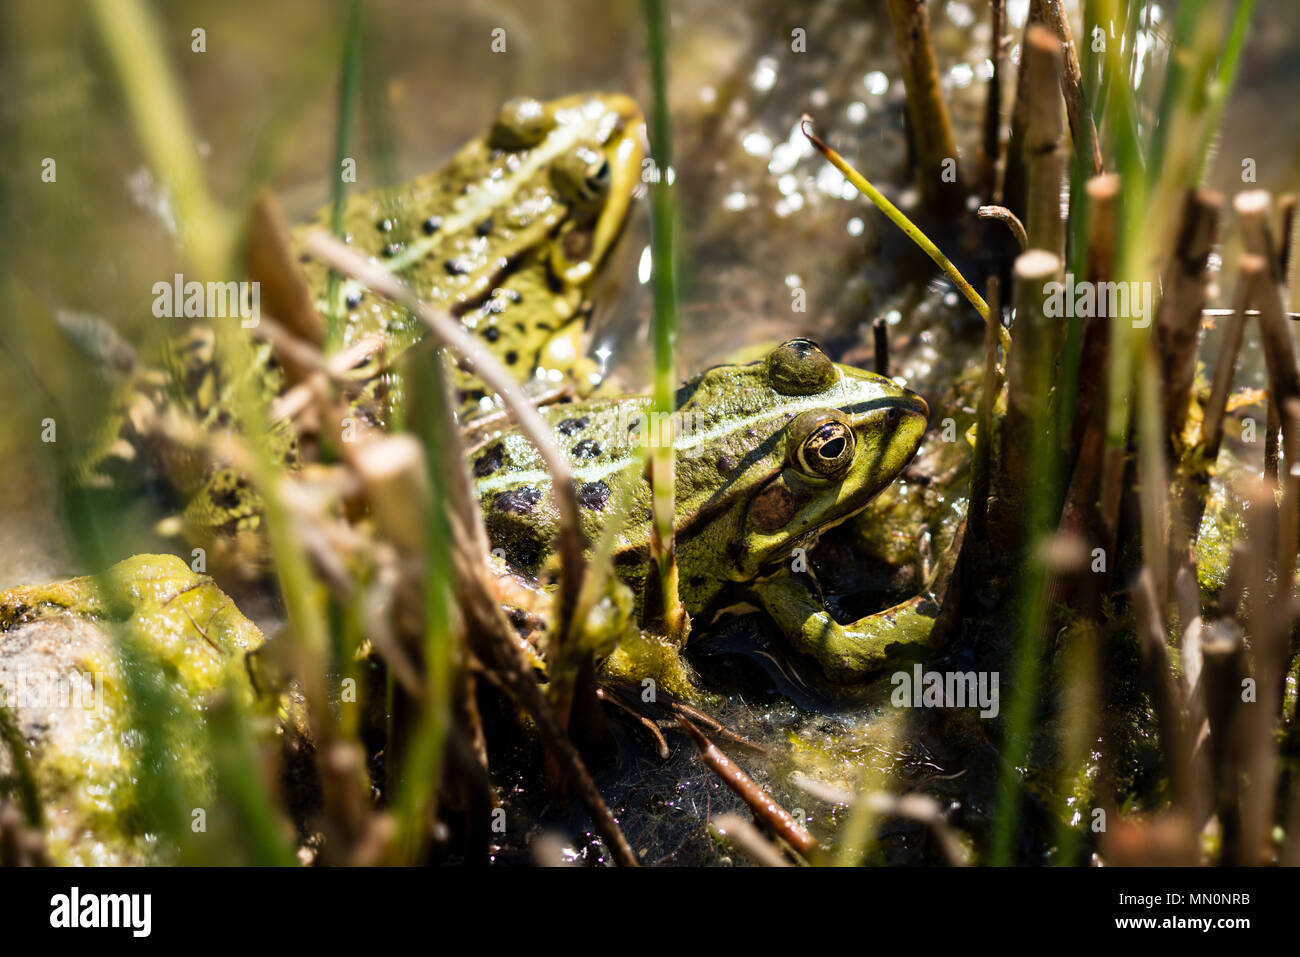 Two frogs in a pond Stock Photo